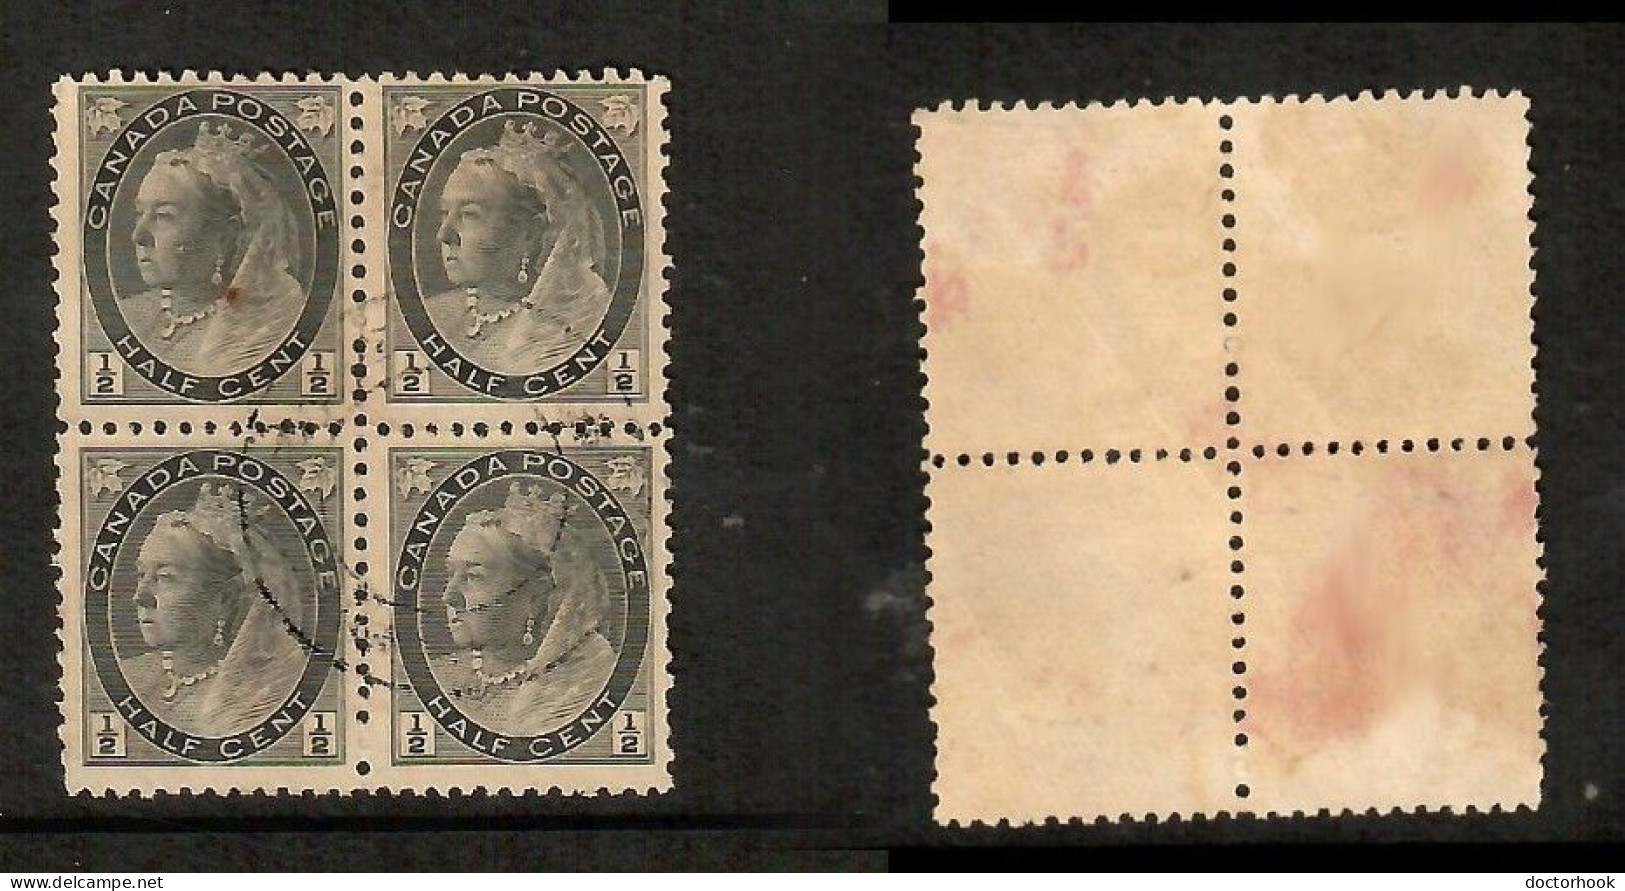 CANADA   Scott # 74 USED BLOCK Of 4 (CONDITION AS PER SCAN) (CAN-204) - Blocs-feuillets